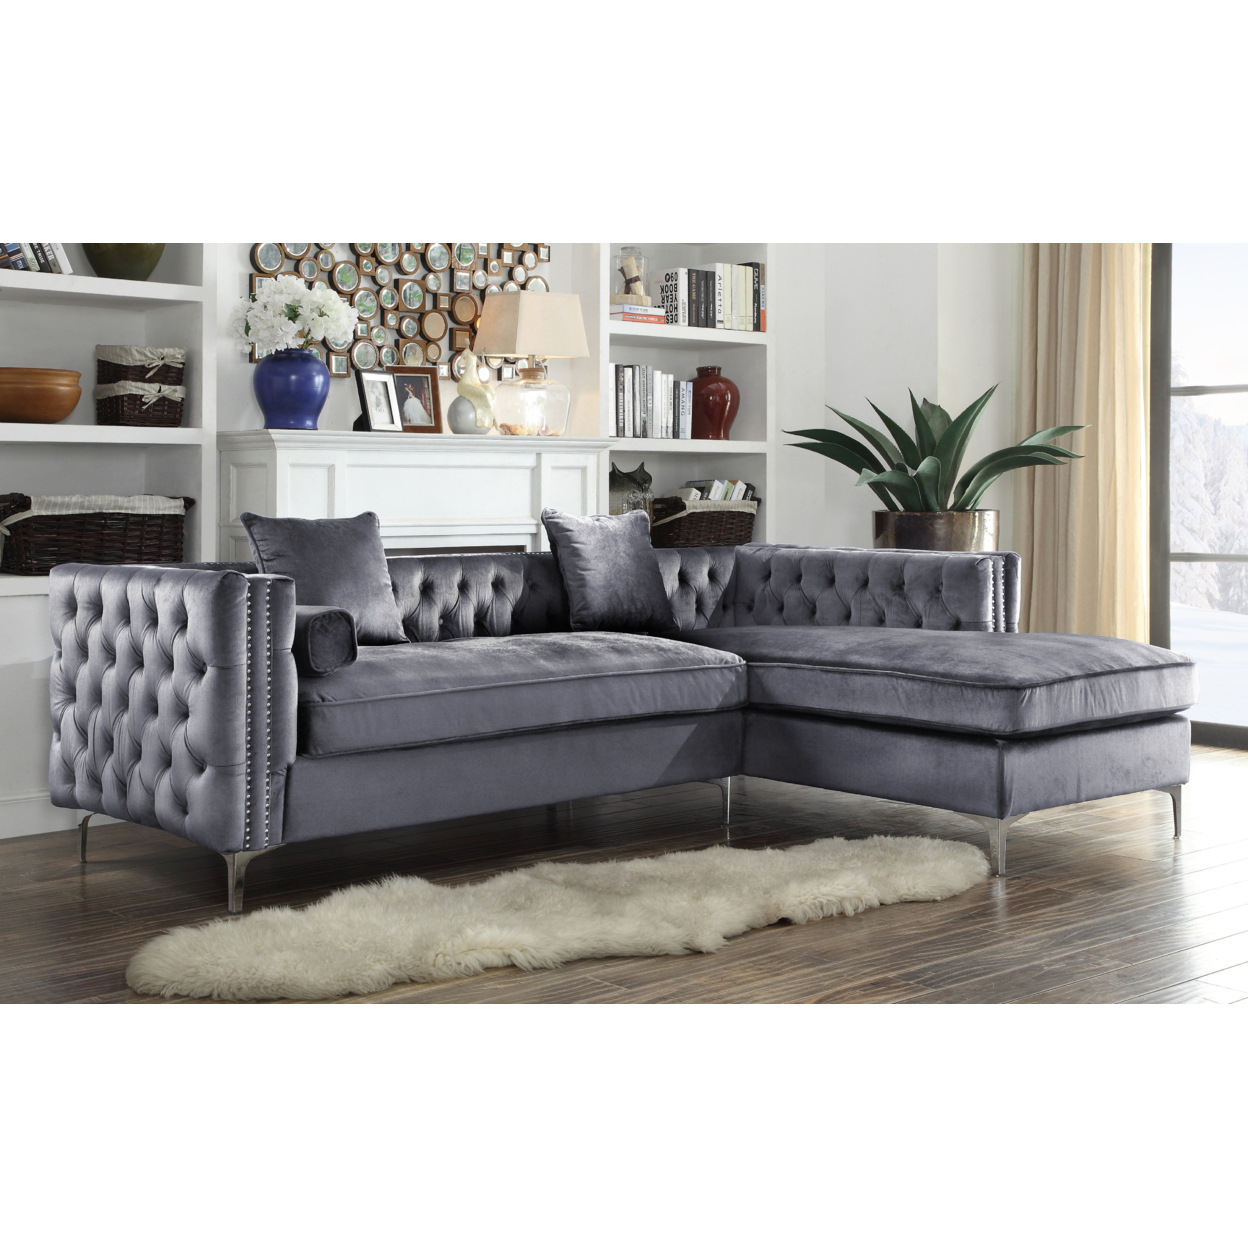 Picasso Velvet Right Facing Sectional Sofa Button Tufted With Silver Nailhead Trim Silvertone Metal Y-leg - Purple